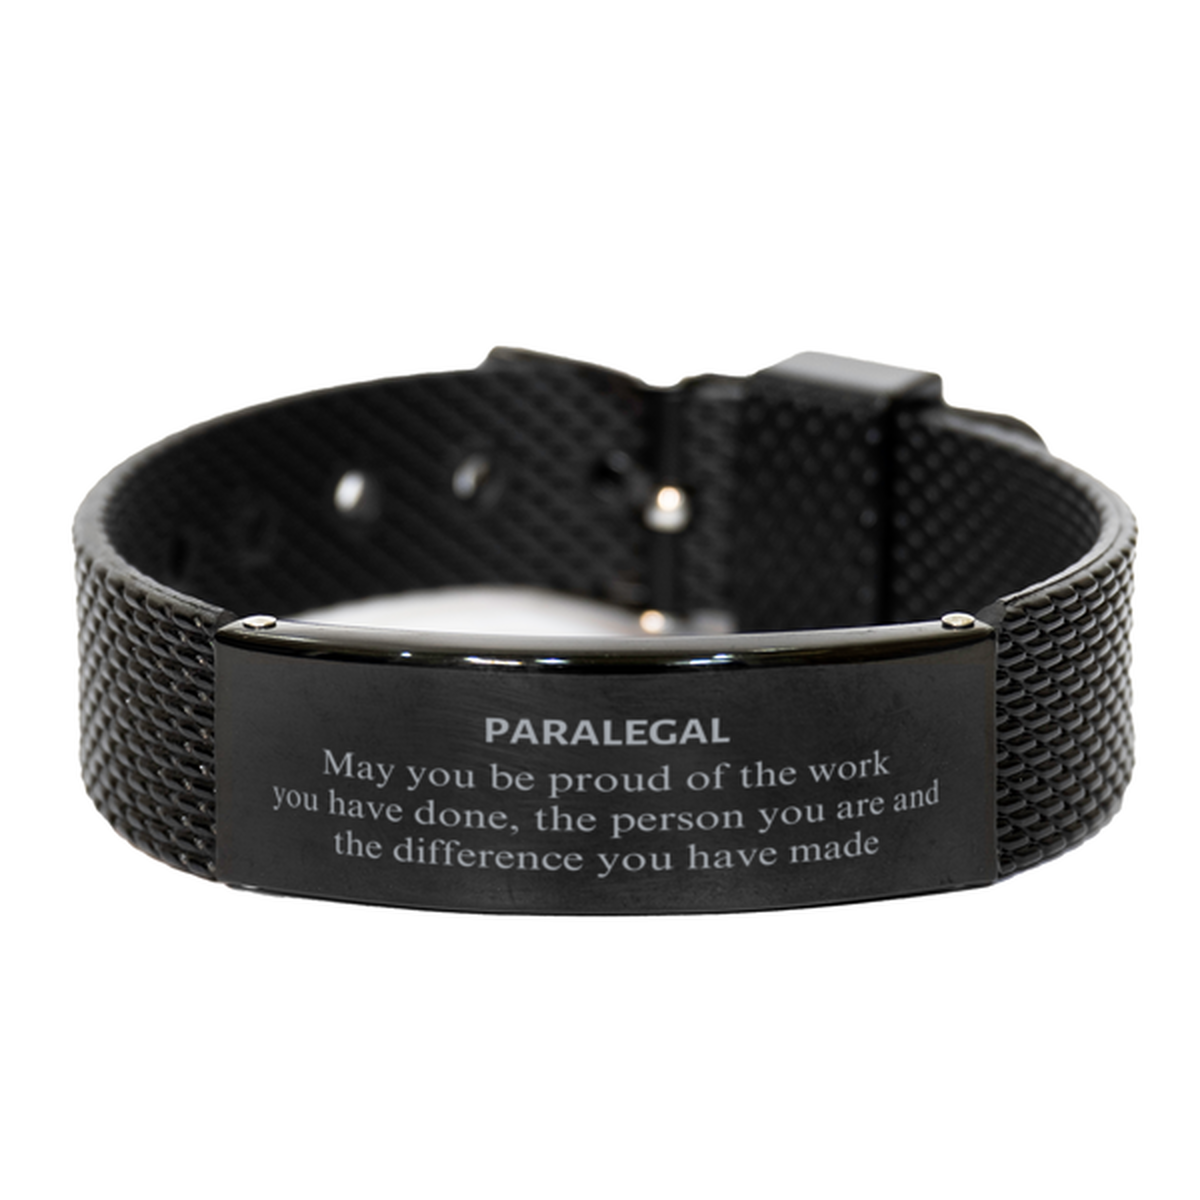 Paralegal May you be proud of the work you have done, Retirement Paralegal Black Shark Mesh Bracelet for Colleague Appreciation Gifts Amazing for Paralegal